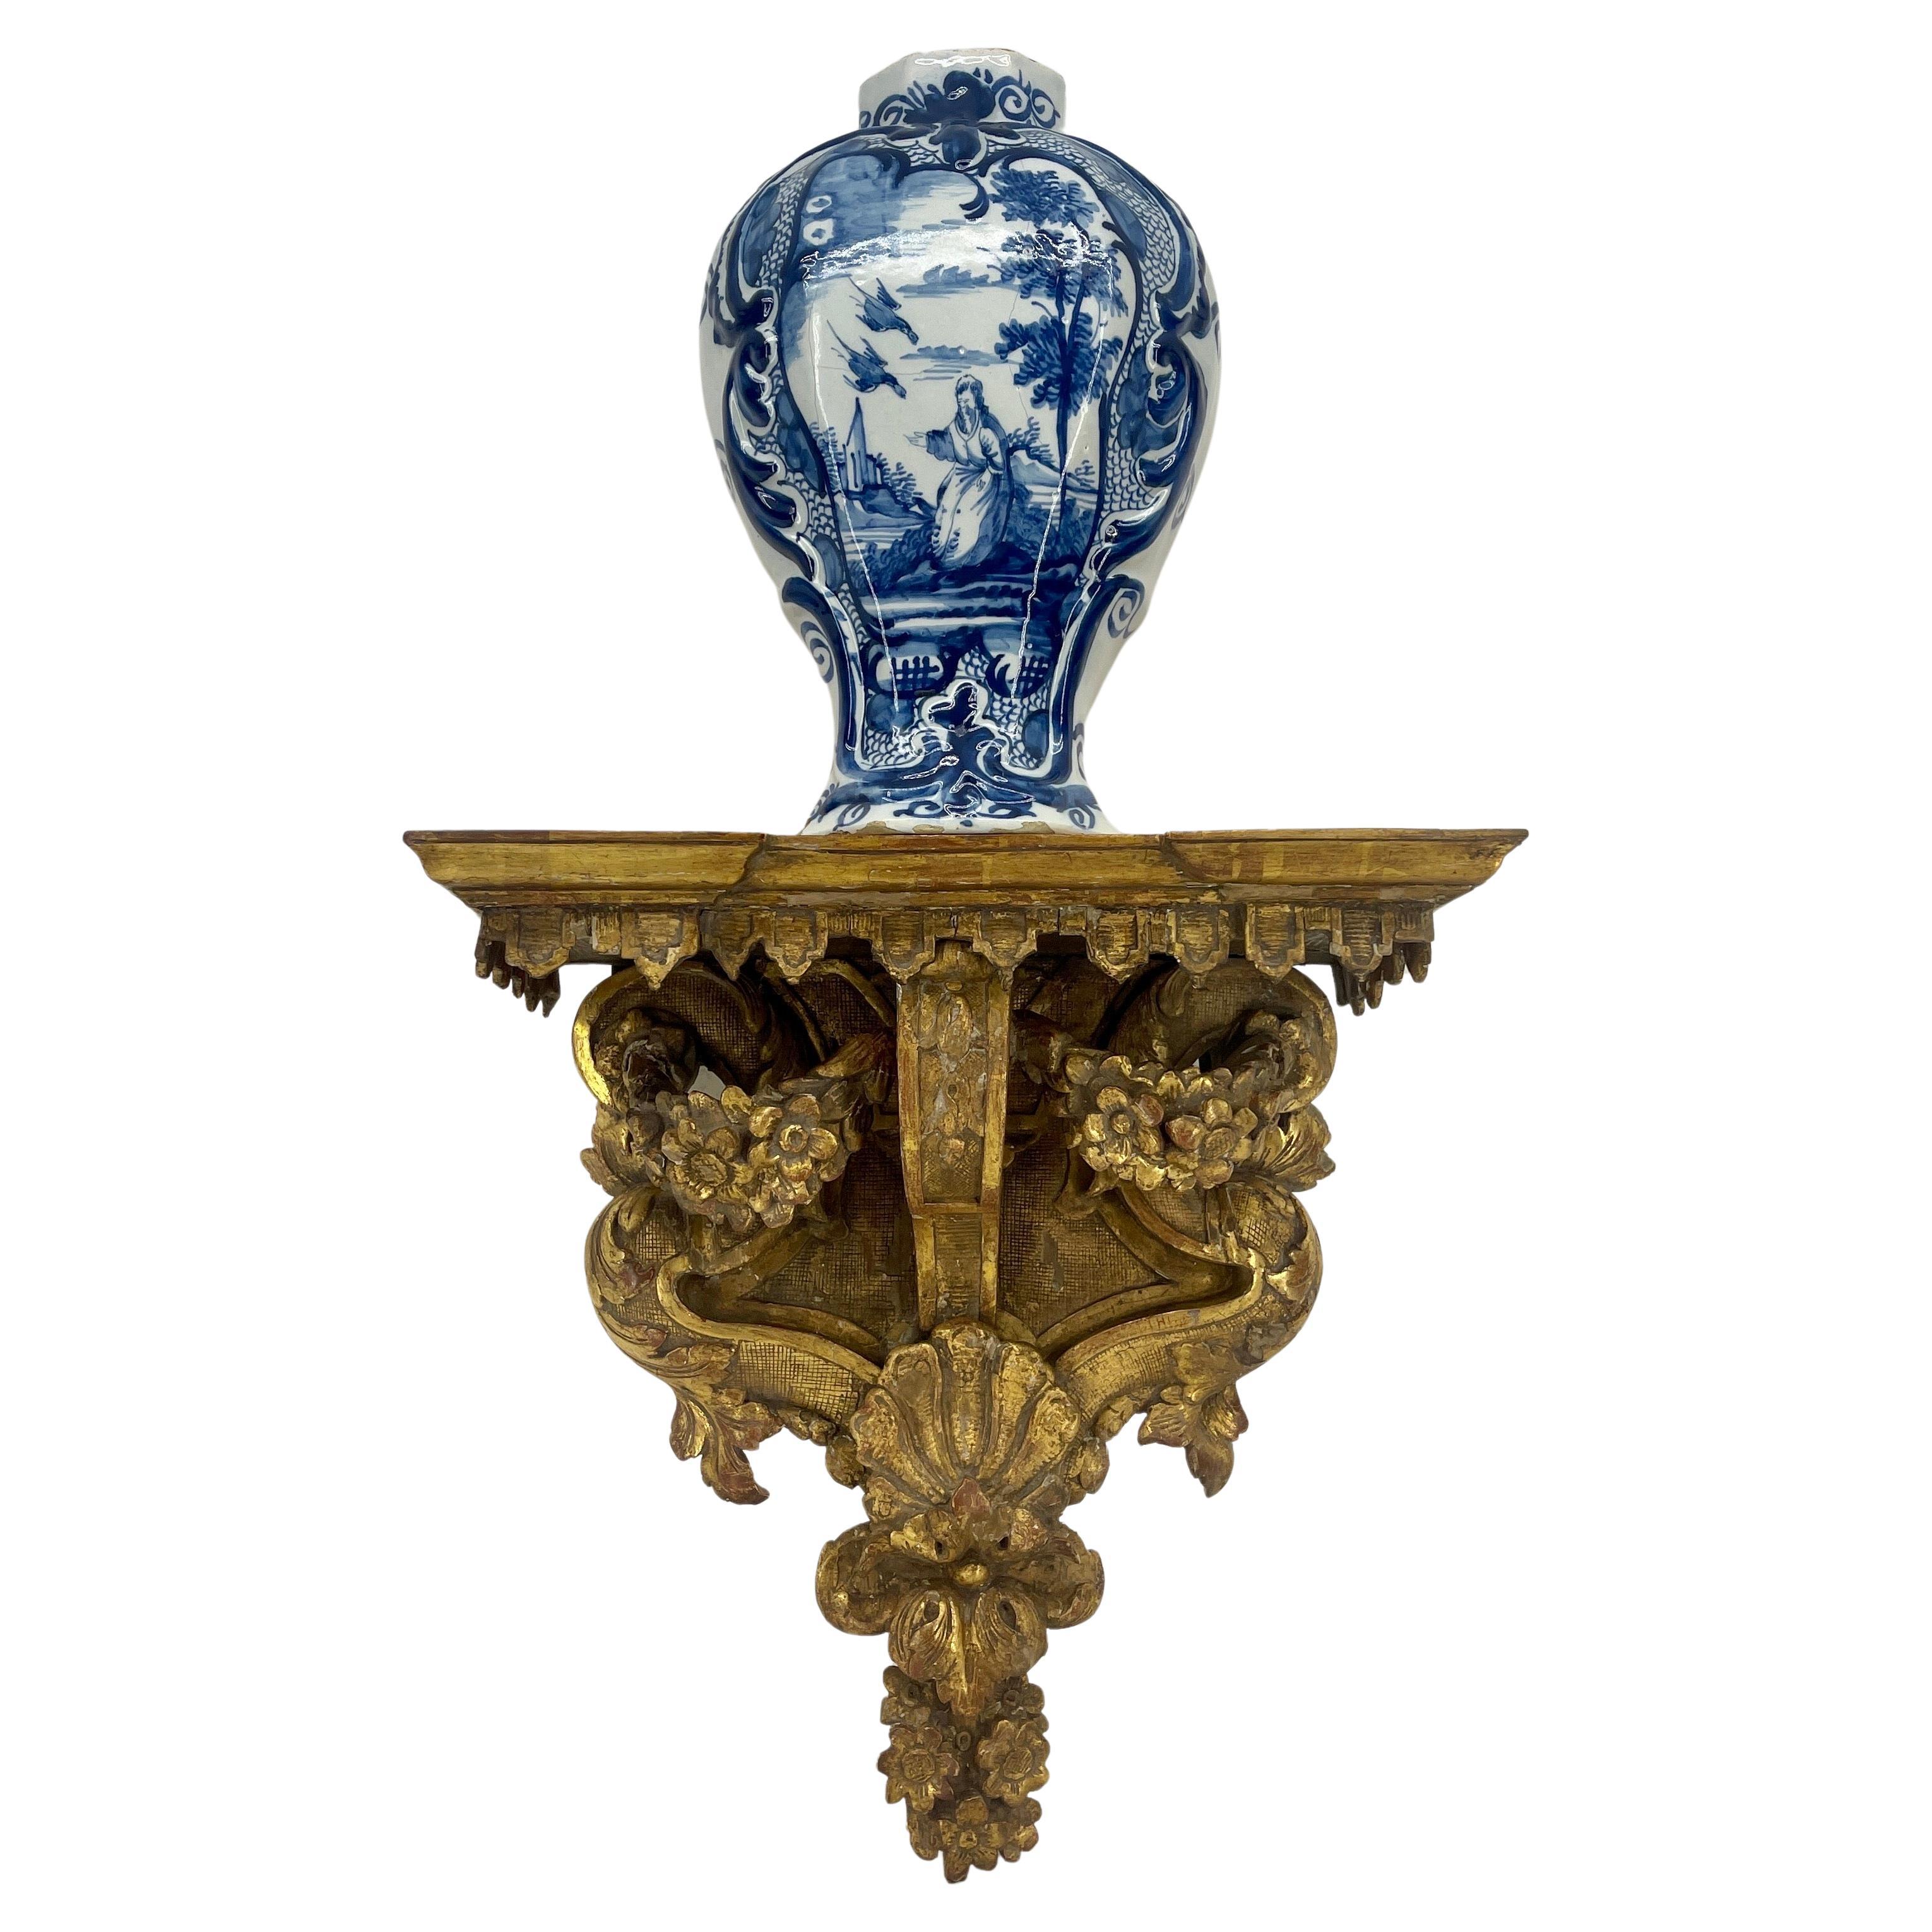 Italian 18th Century Gilded Wood Wall Corbel Shelf

Beautifully constructed gilt wood and ornamented with floral swags and intricate cross hatch pattern throughout. This hand carved gilt piece would be wonderful architectural element standing alone